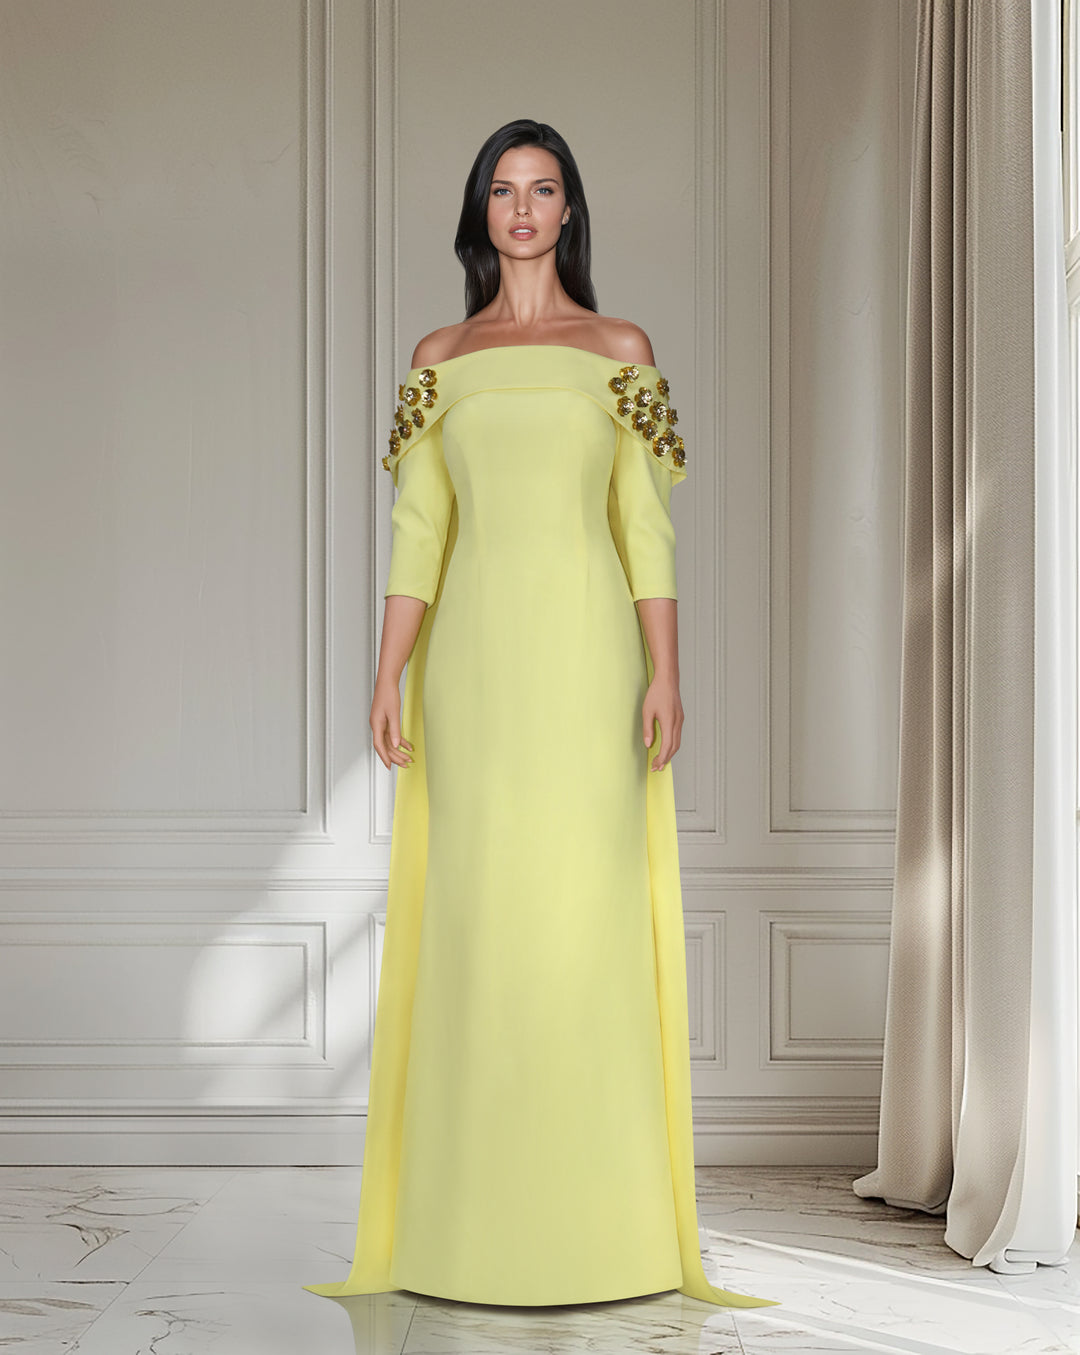 Strapless dress with back cape and 3D flowers - ZOSIME